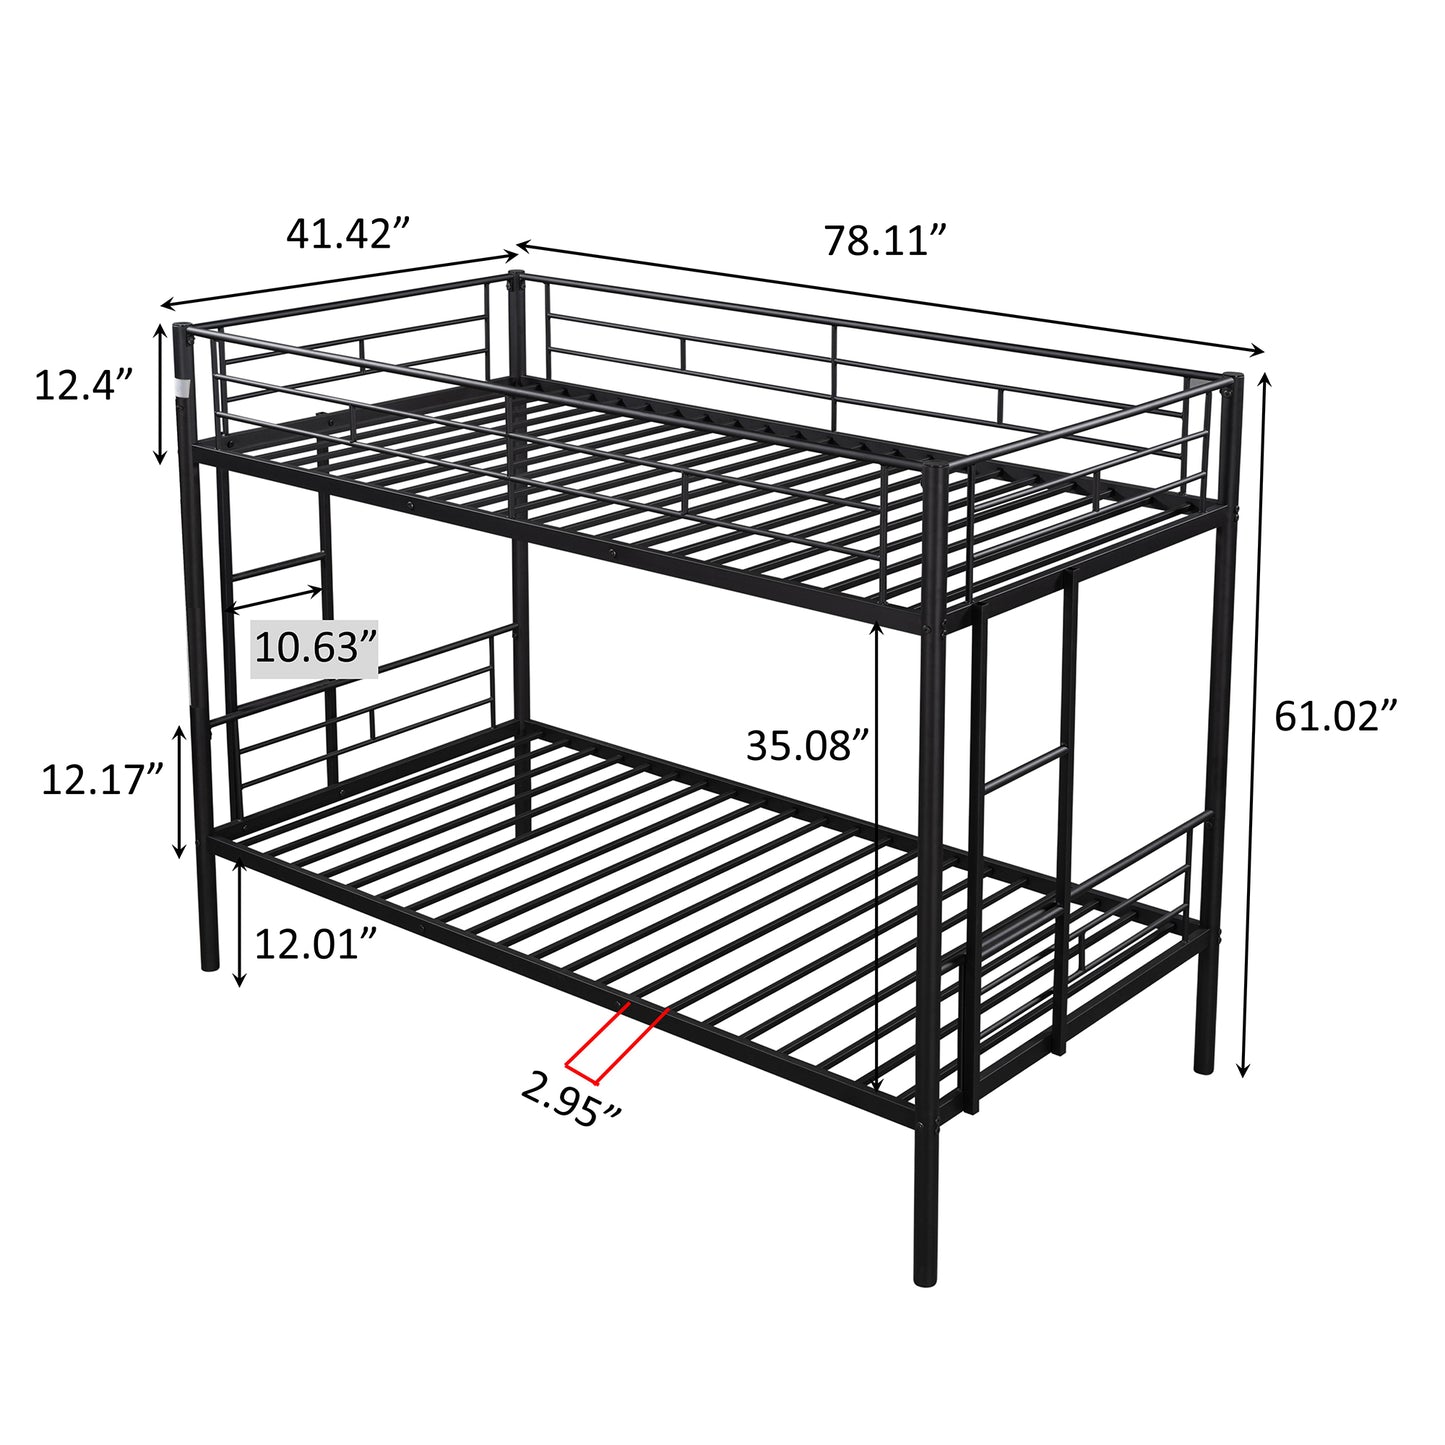 SYNGAR Metal Twin Over Twin Bunk Beds, Twin Bunk Beds for Kids Teens Adults, Industrial Bunkbed No Box Spring Required, Black